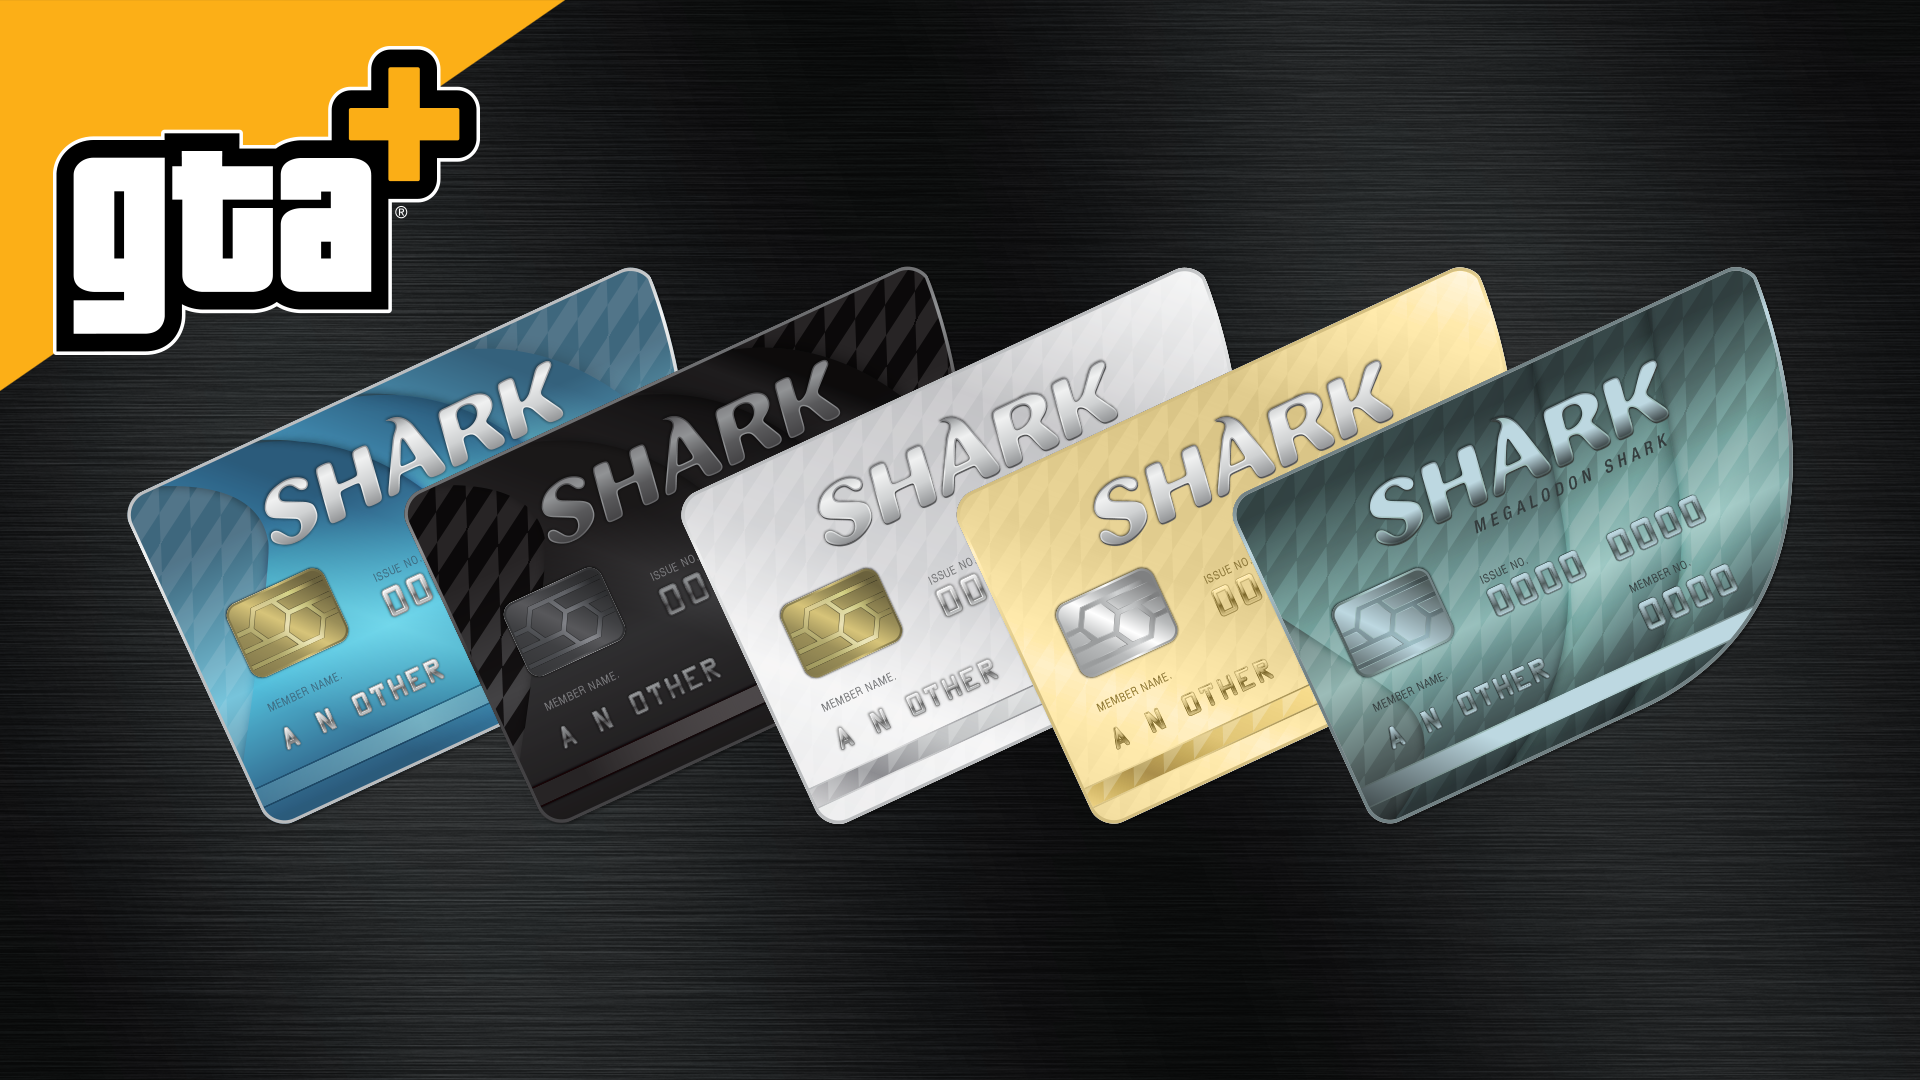 Take advantage of special GTA+ Shark Cards that give even more GTA$ with each purchase.